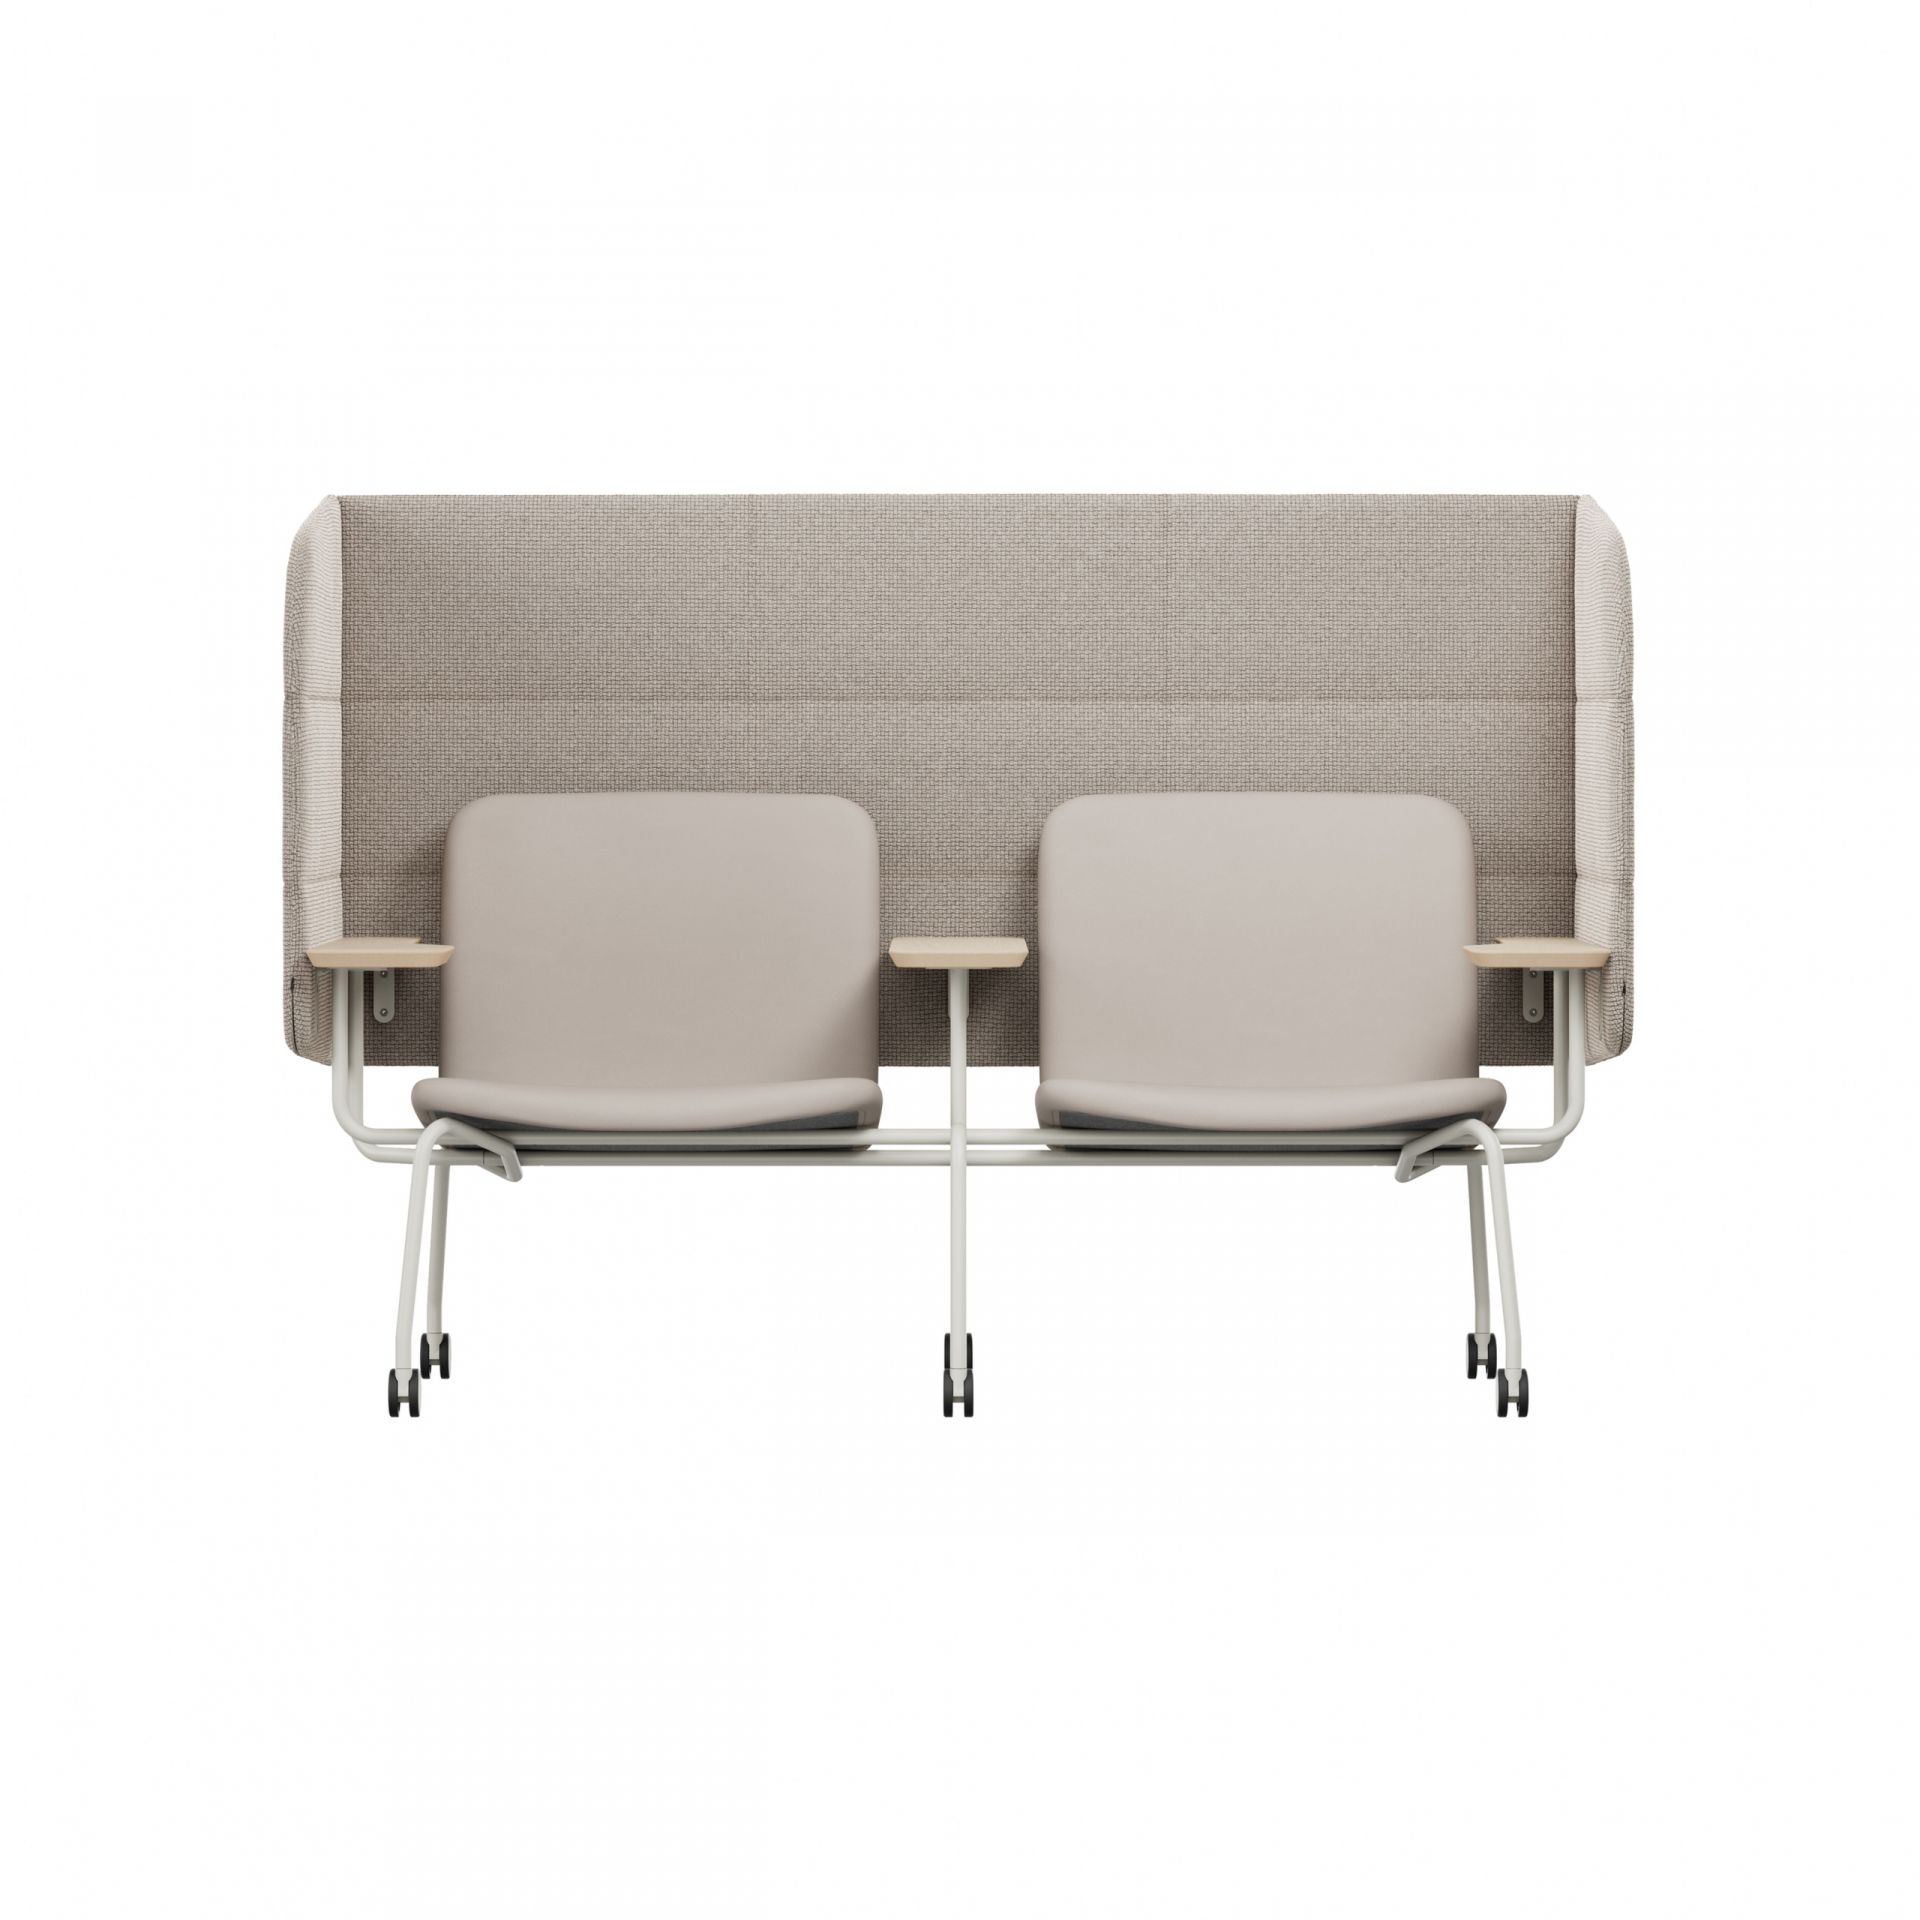 Hybe Pod / meeting place 2-seater